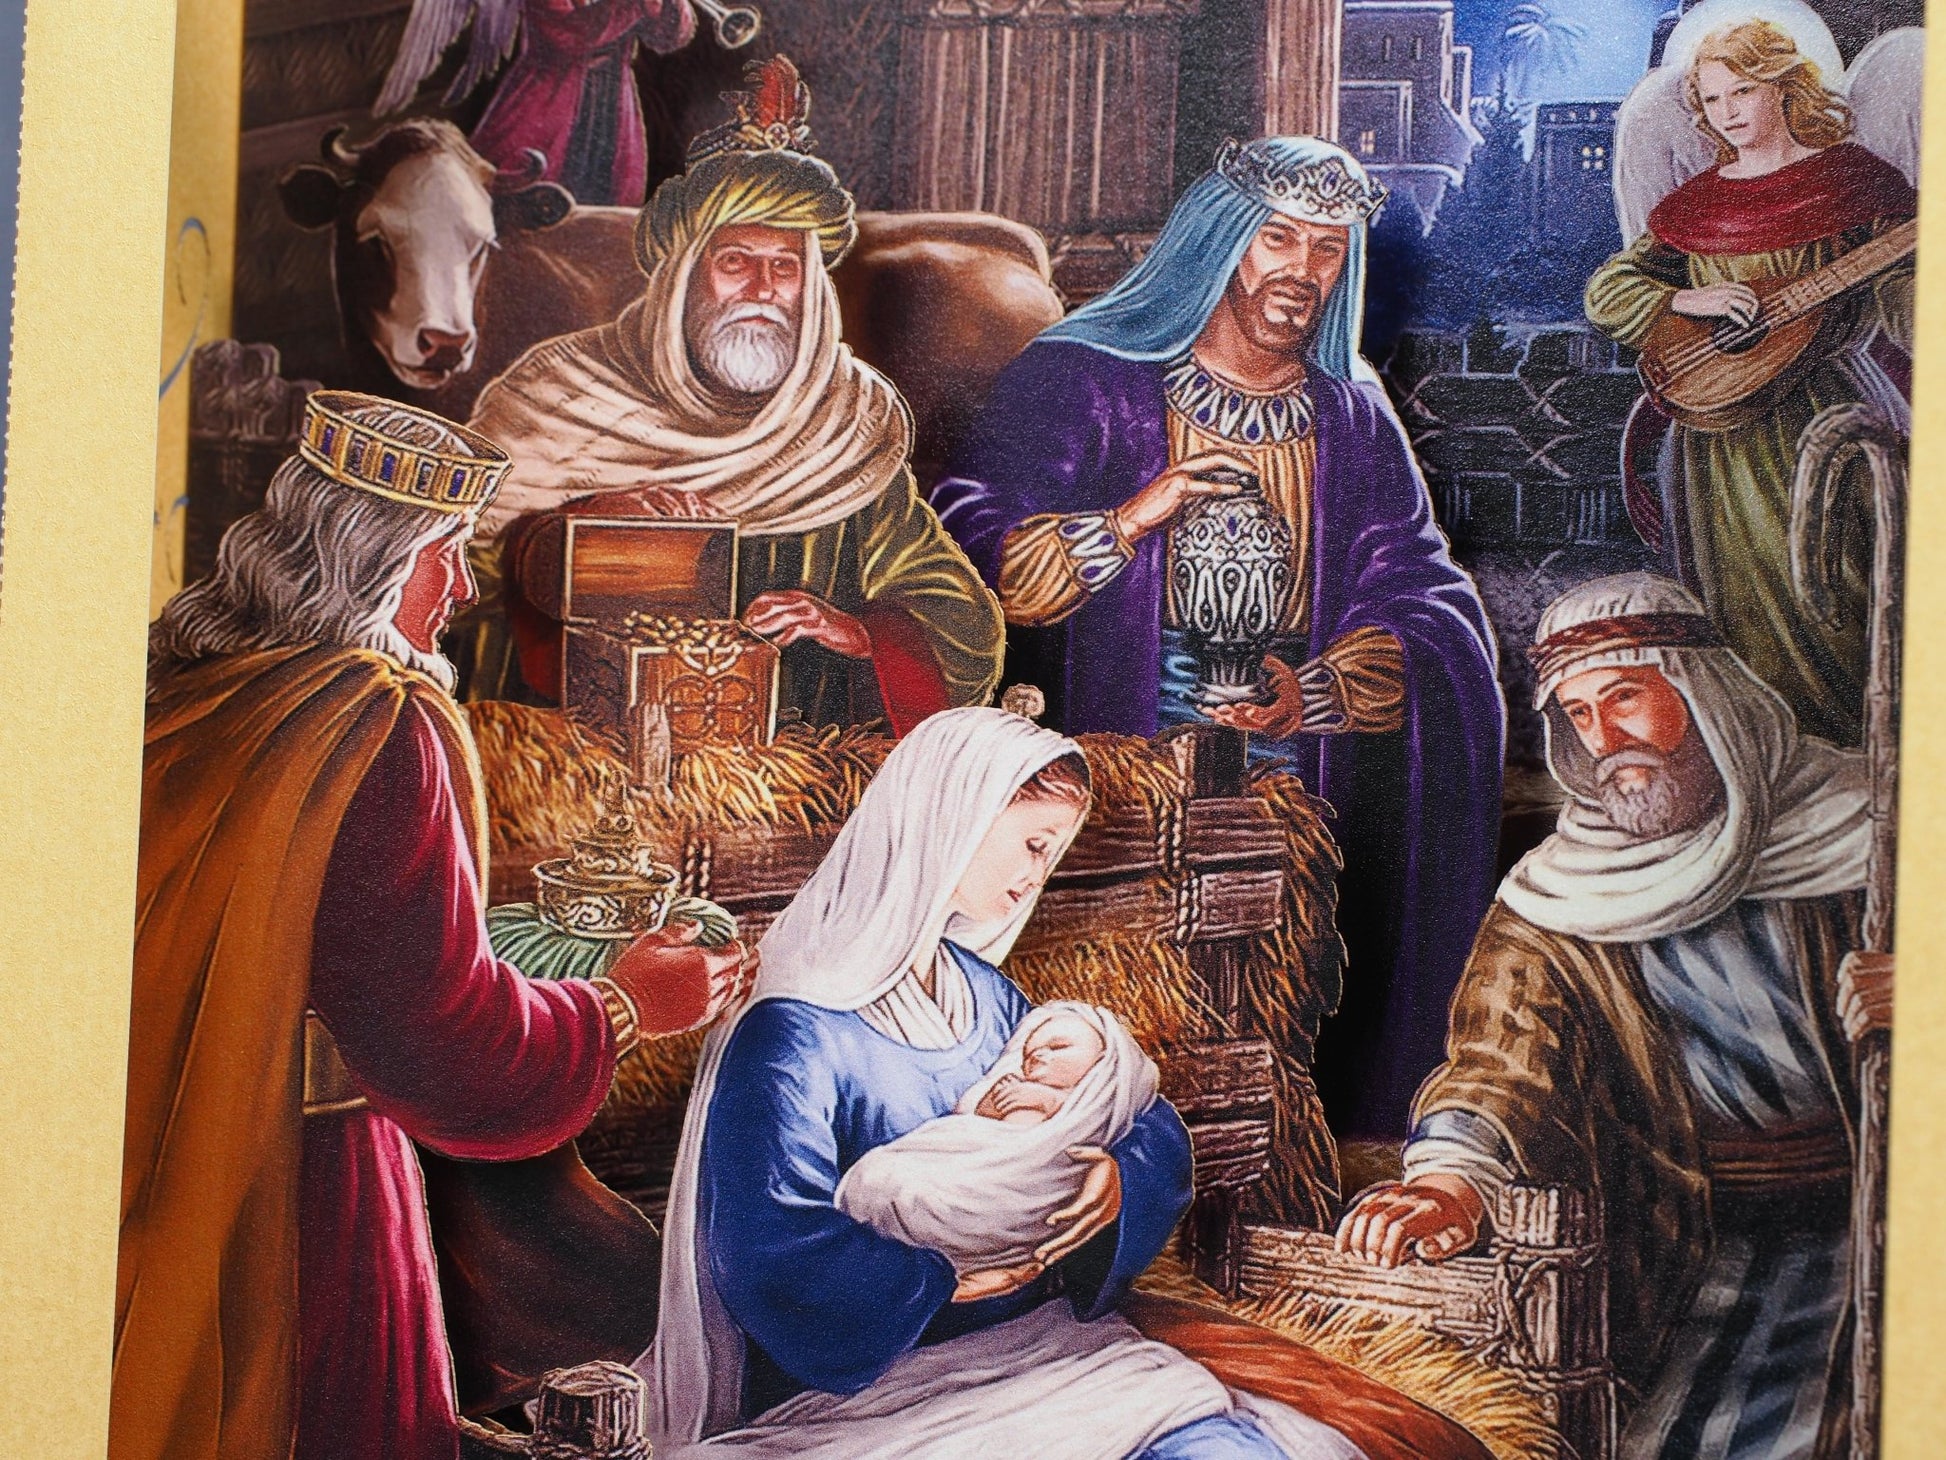 Holy Nativity paper miniature scene. Holy Crib, baby Jesus, Mother Mary, Joseph, holy star. Popup card. - ColibriGift